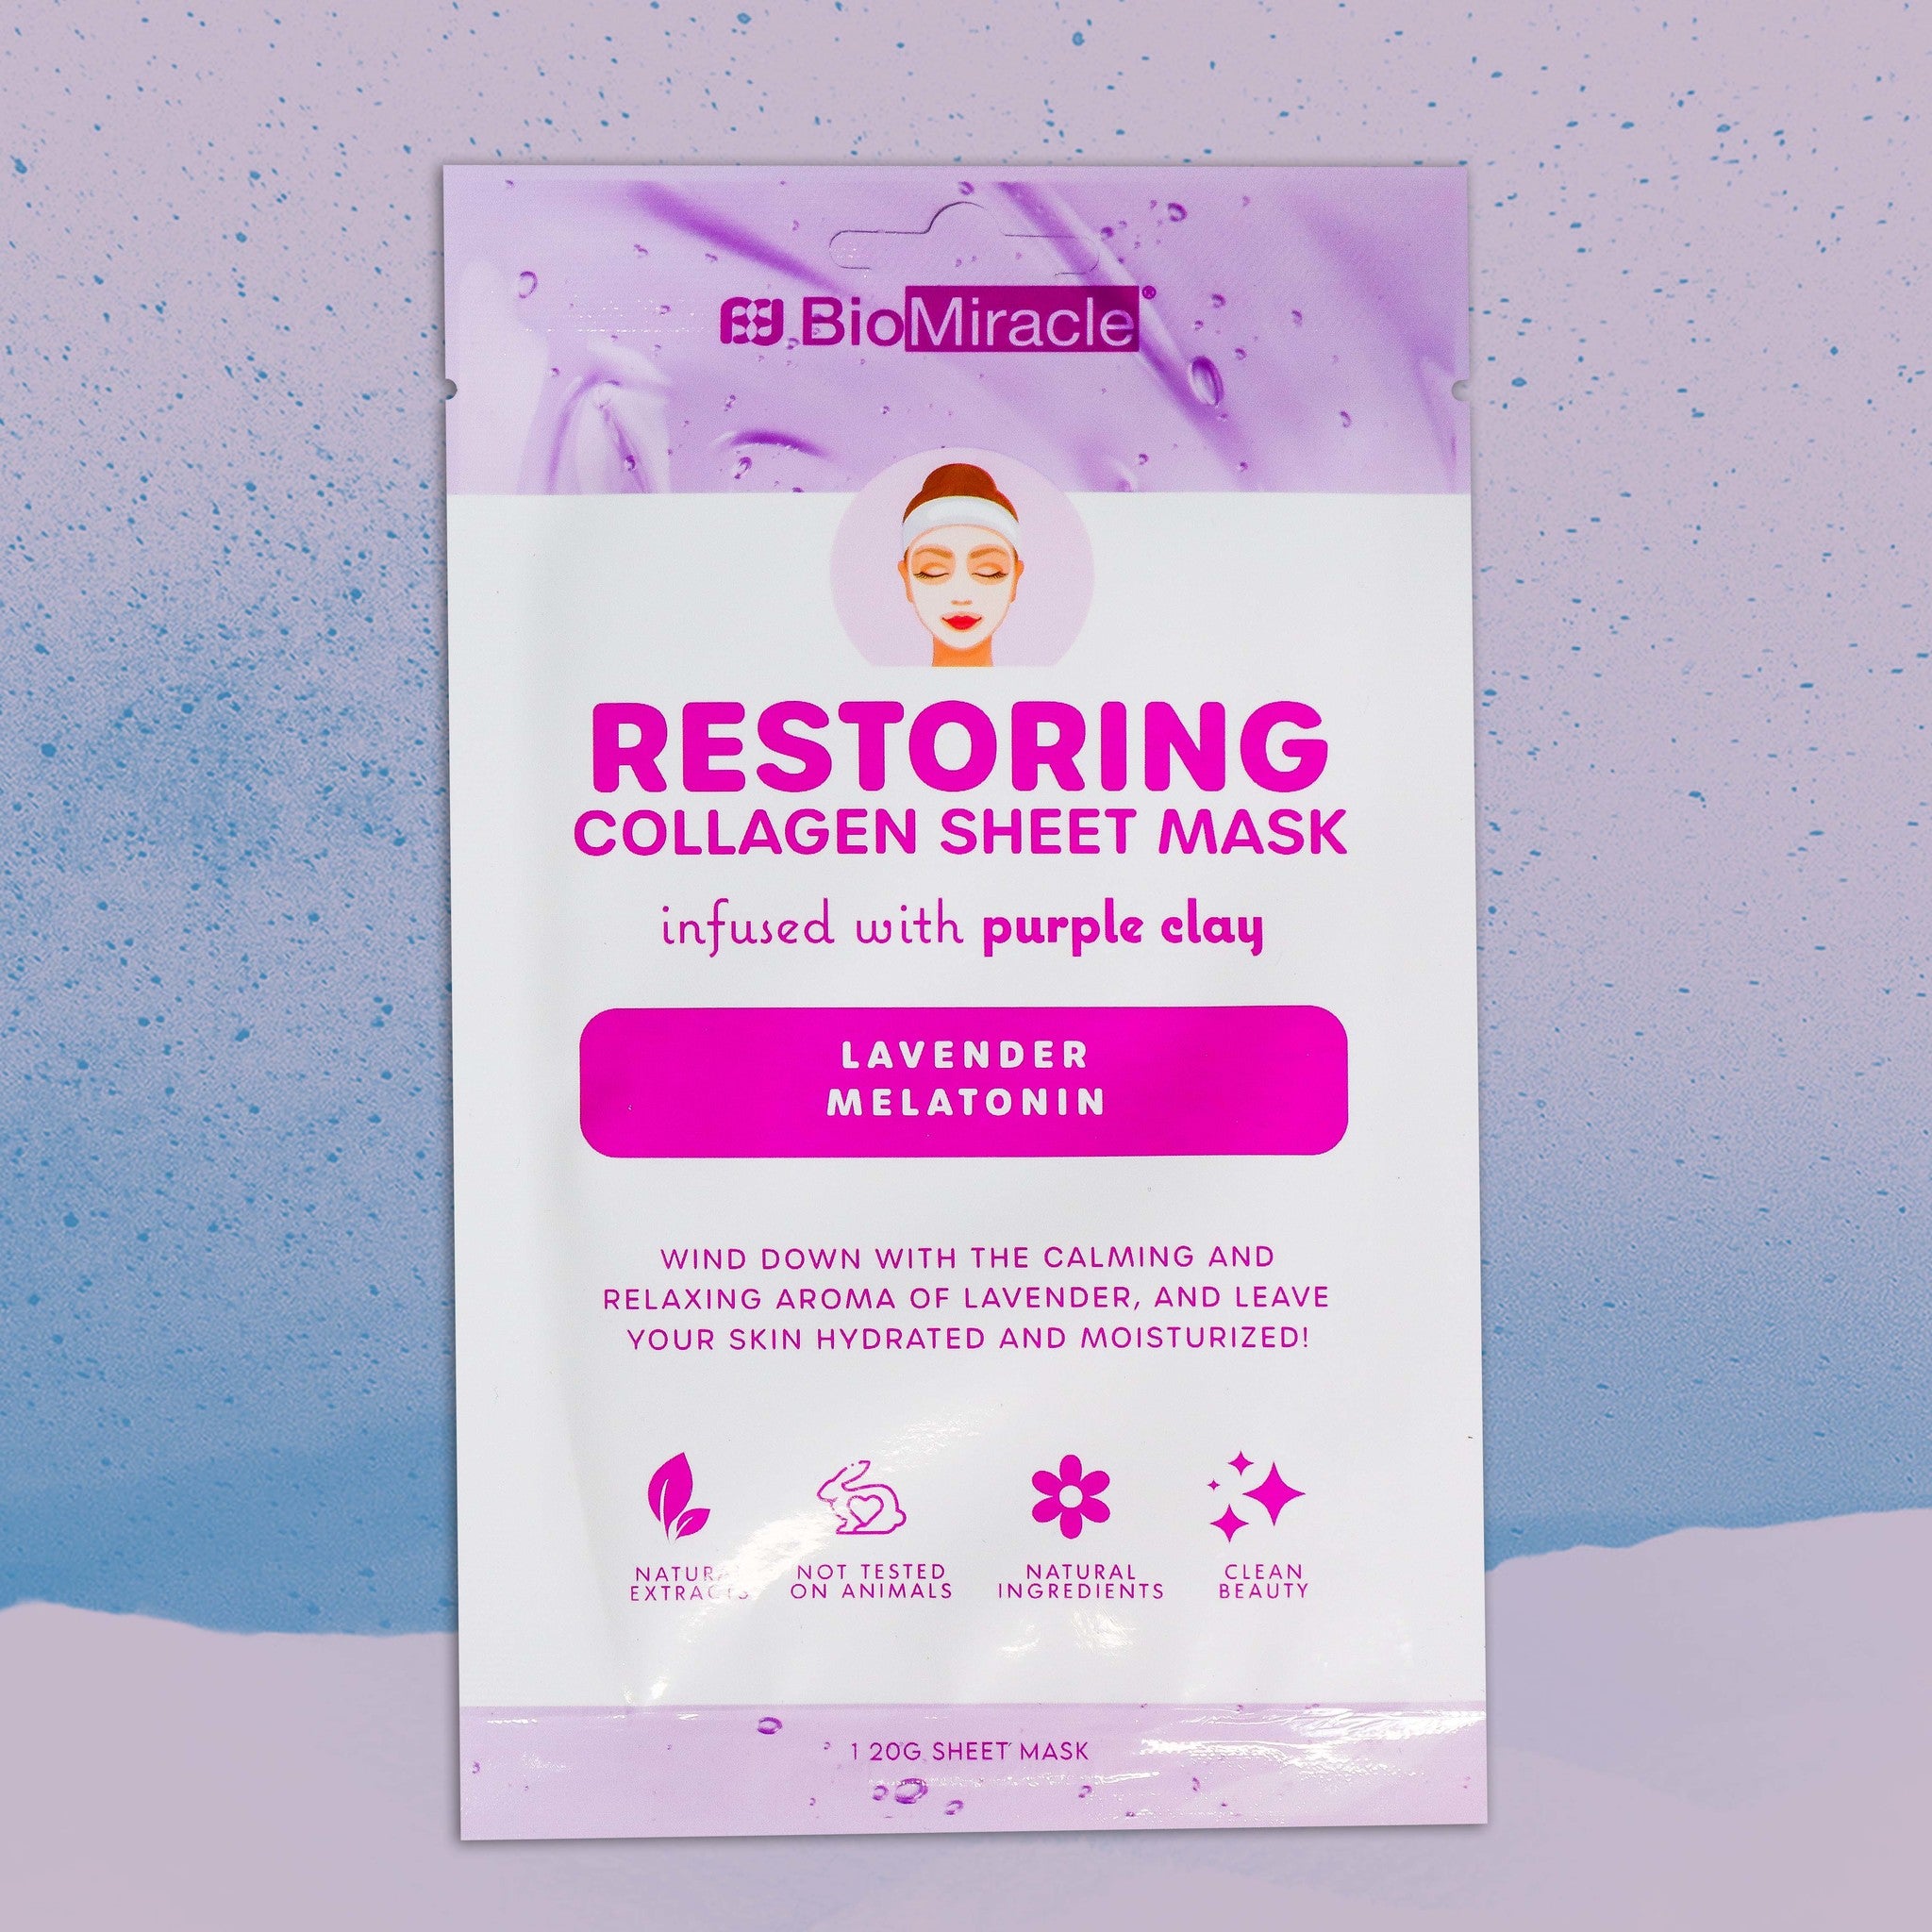 Restoring Collagen Sheet Mask Infused with Purple Clay, Lavender and Melatonin-10 Pack